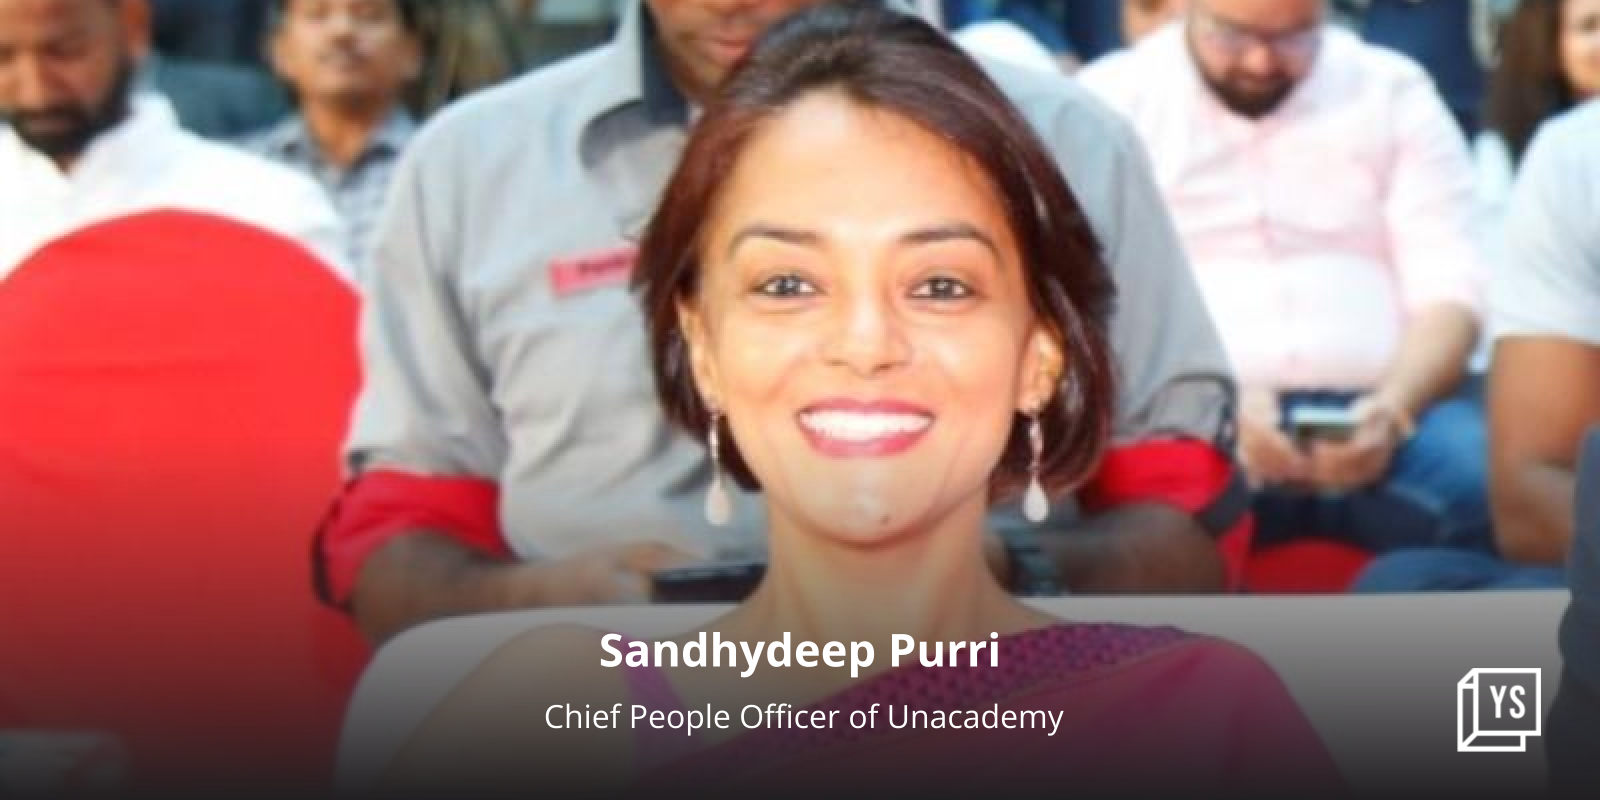 Unacademy appoints Sandhydeep Purri as CPO amid top-level departures